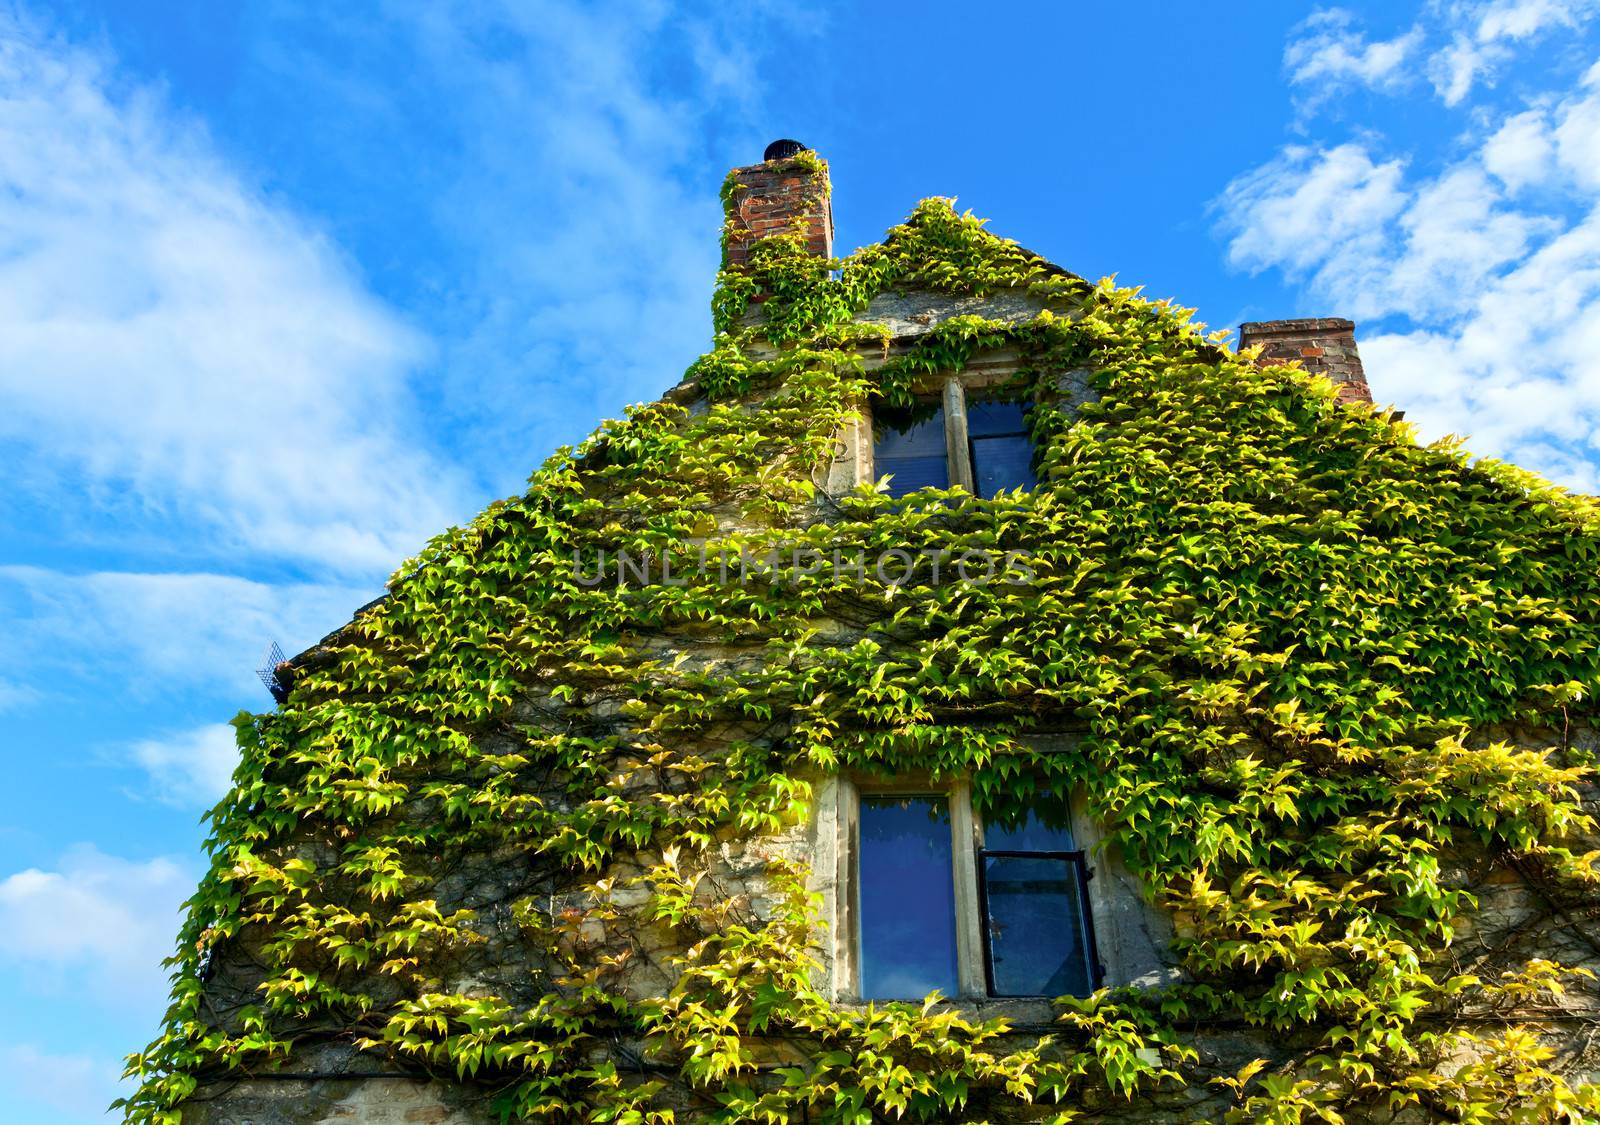 House covered by climbing English ivy by naumoid